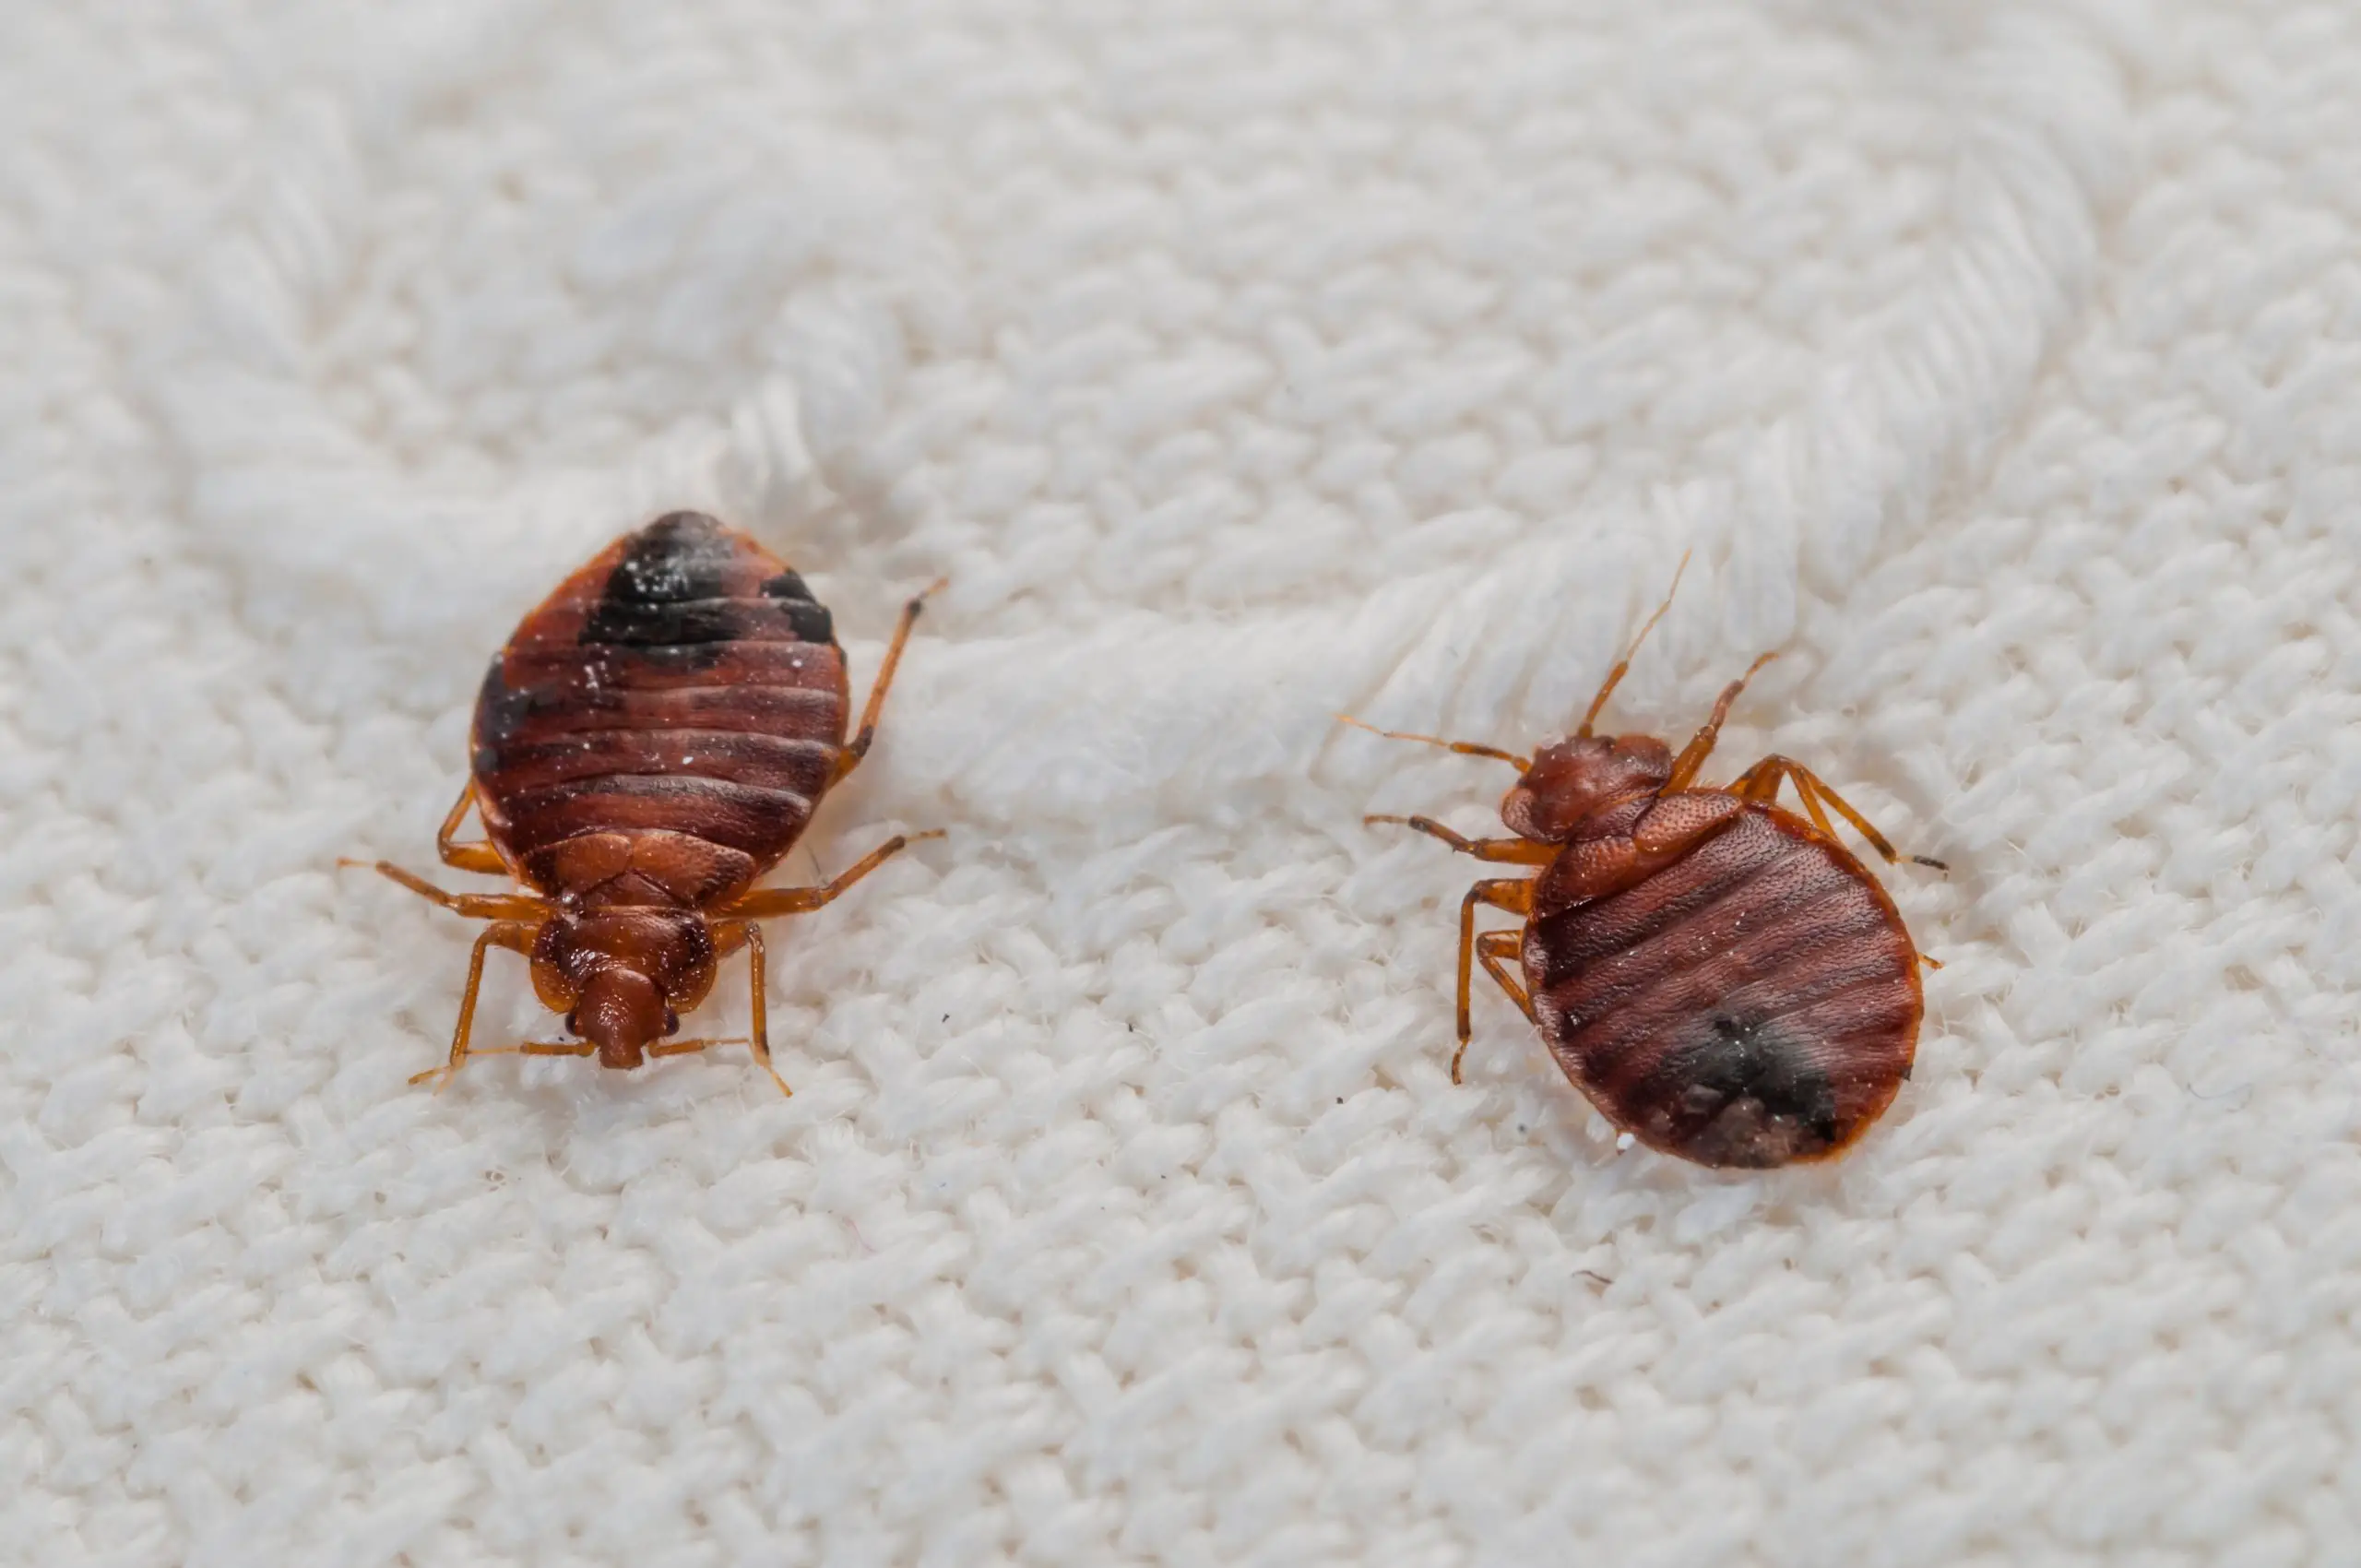 Do Bed Bugs Have a Natural Enemy For Bed Bugs?